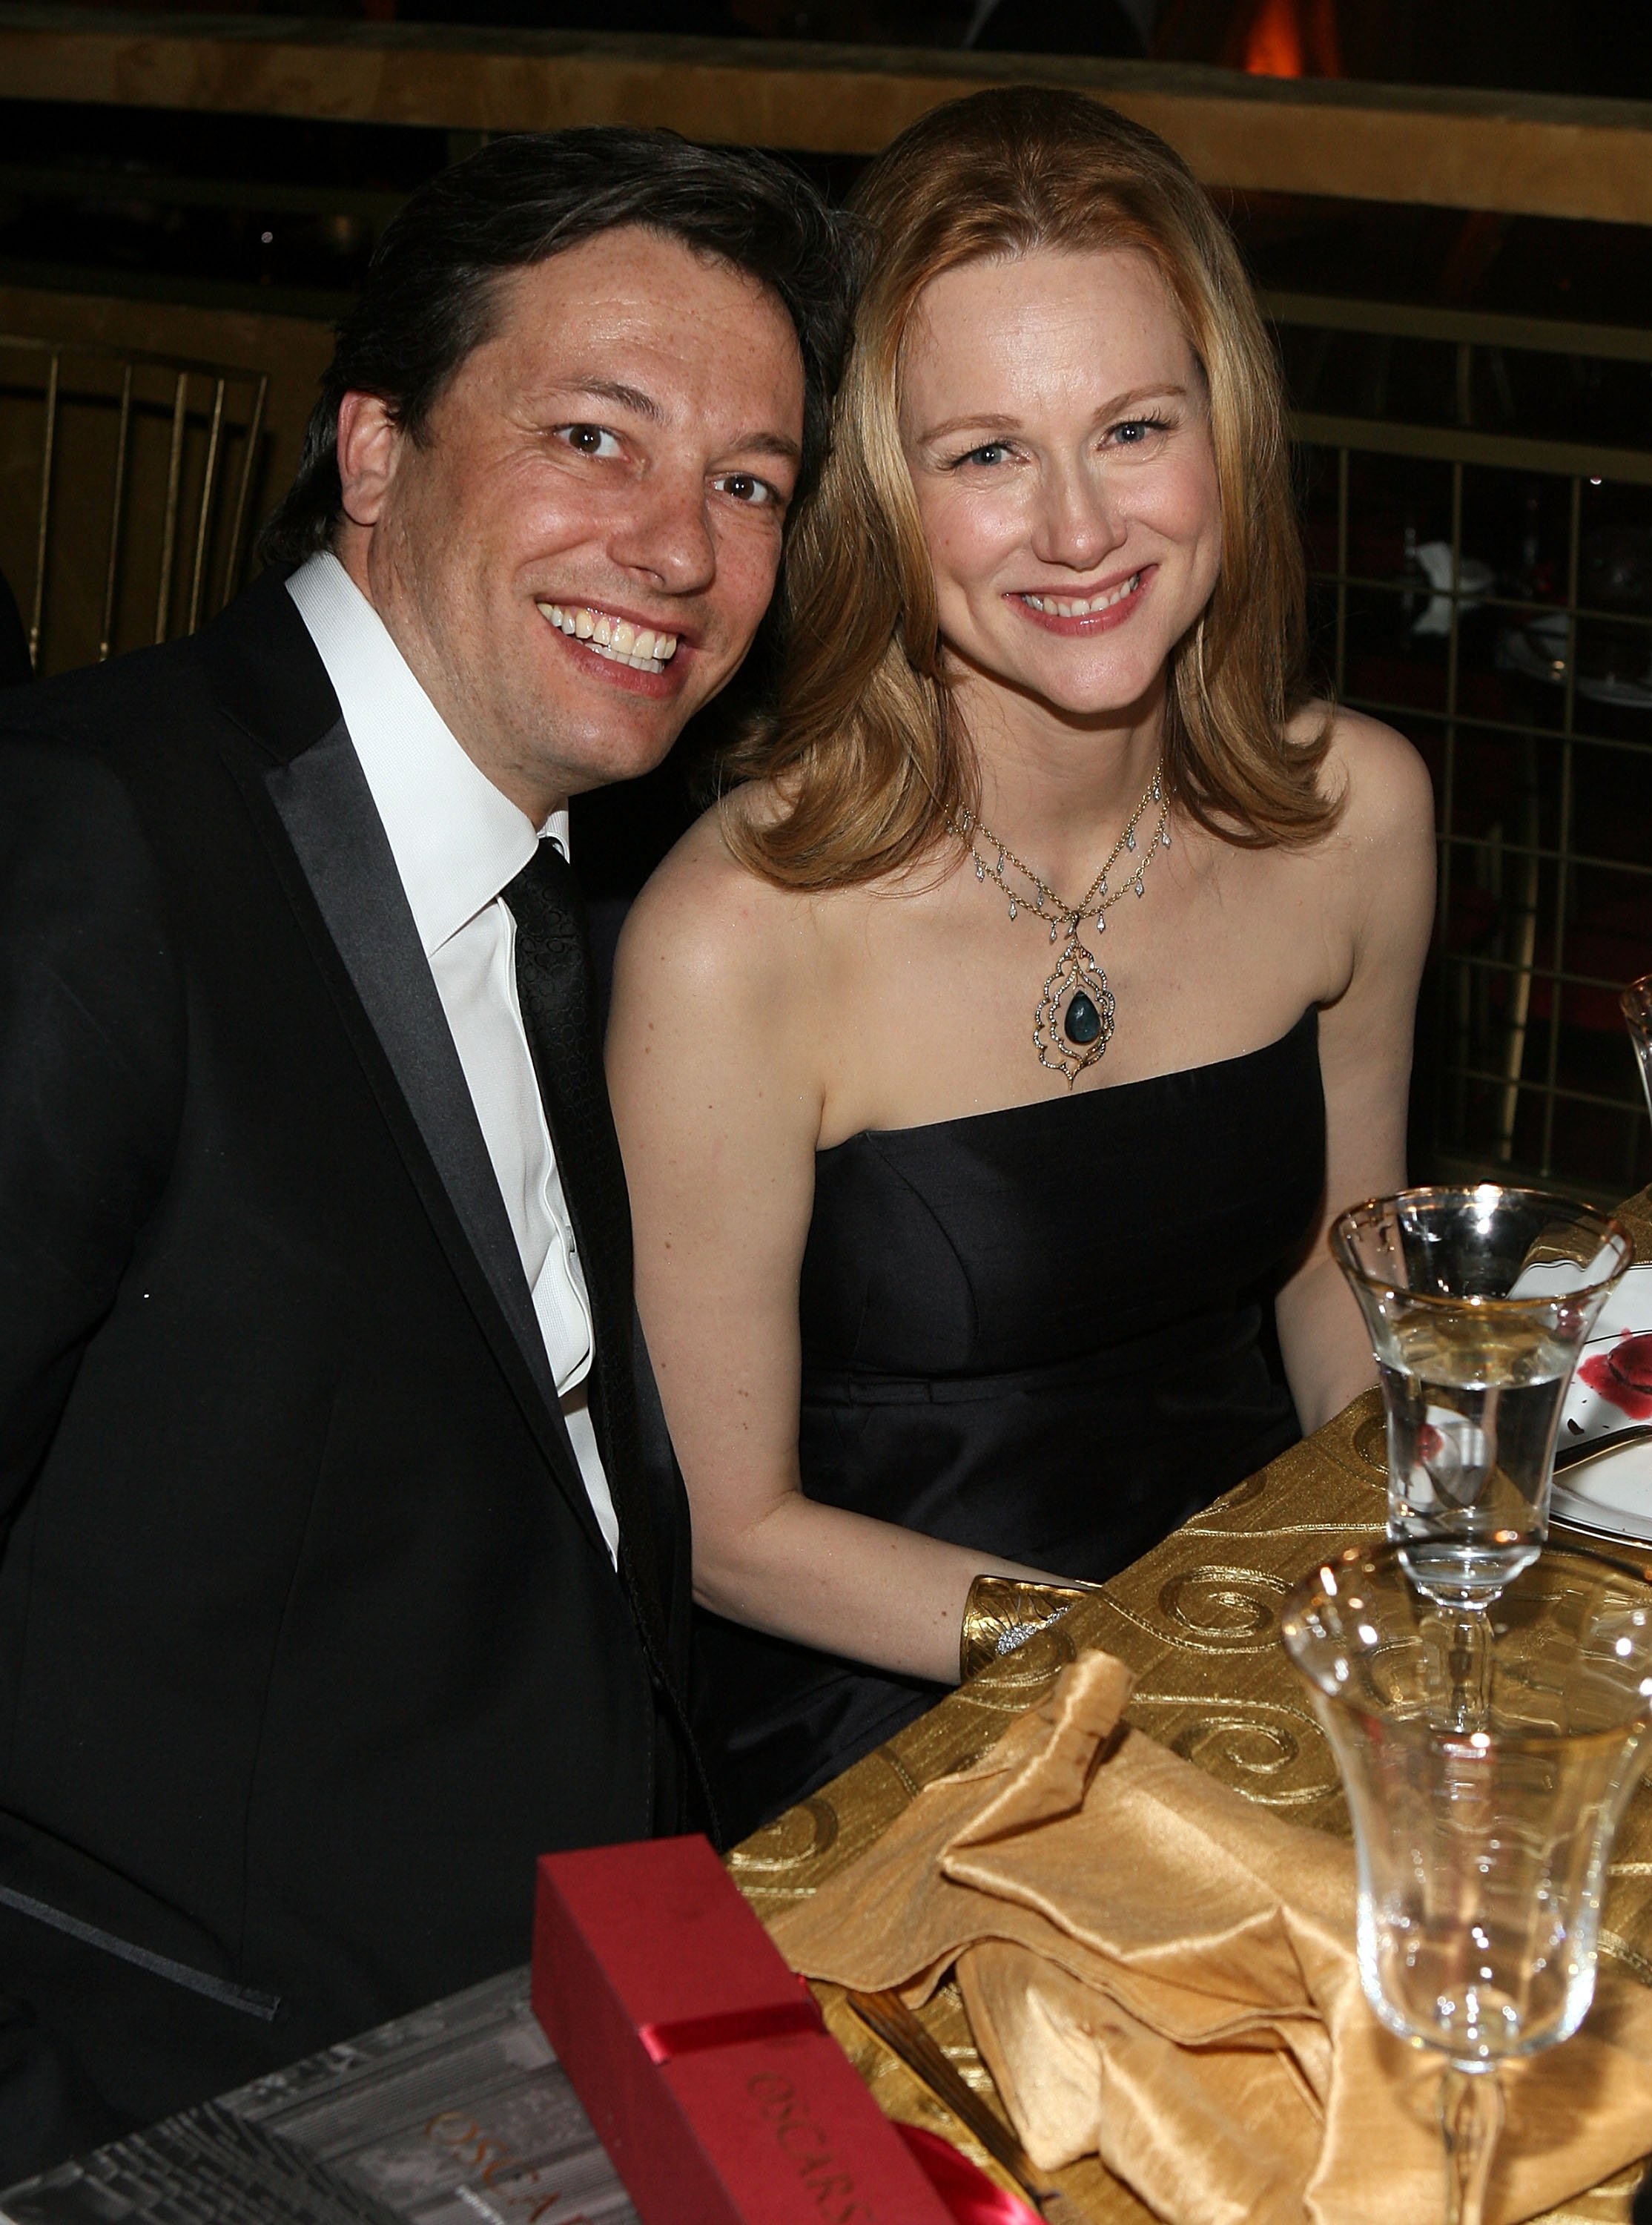 Laura Linney and Marc Schauer during the Governor's Ball at The Highlands on February 24, 2008 in Hollywood, California. / Source: Getty Images